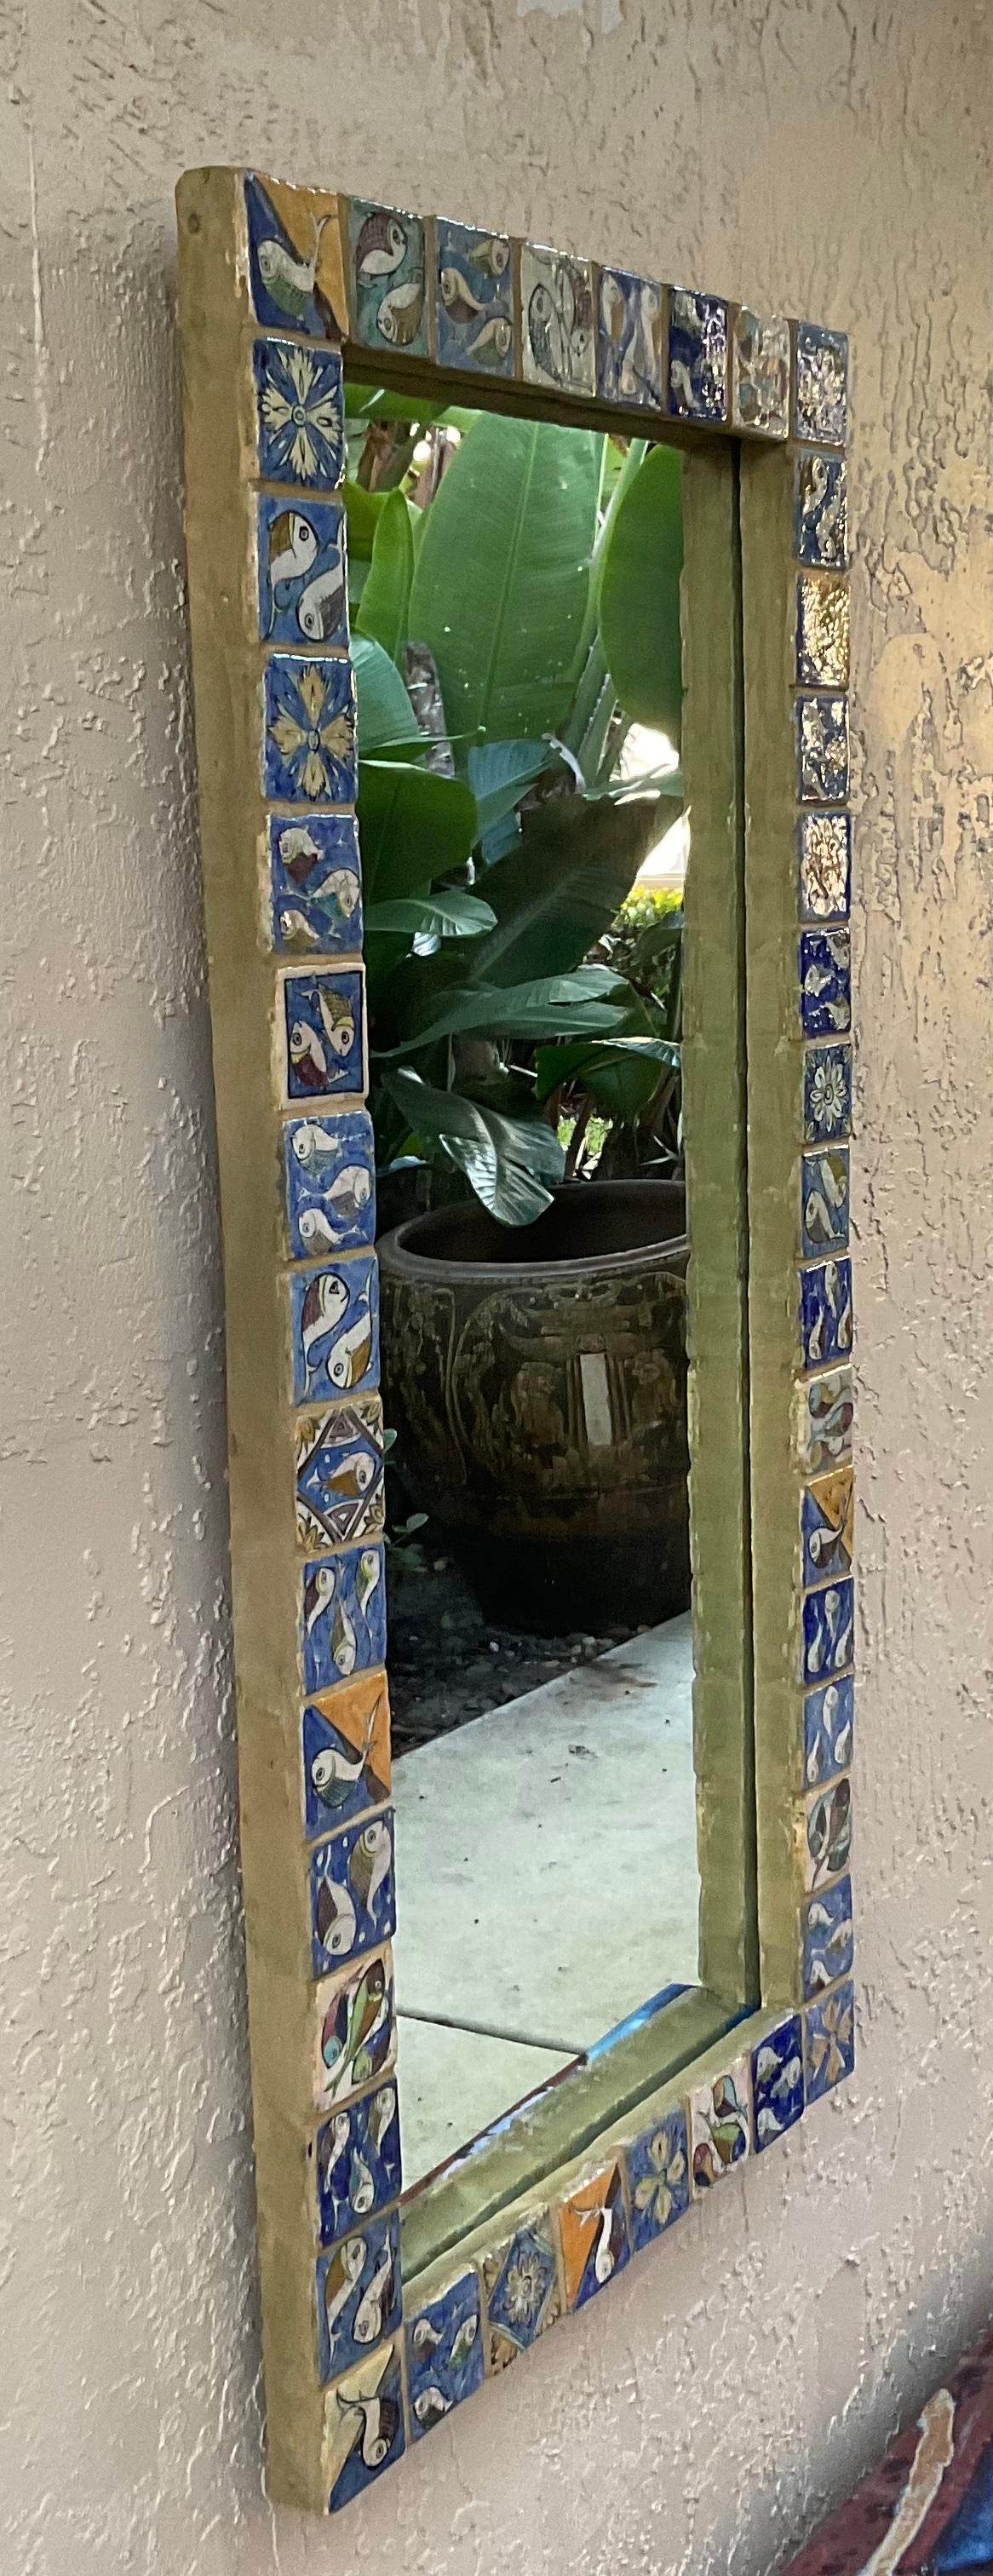 Contemporary One of a Kind Large Hand Painted Ceramic Tile Mirror by Joseph Malekan